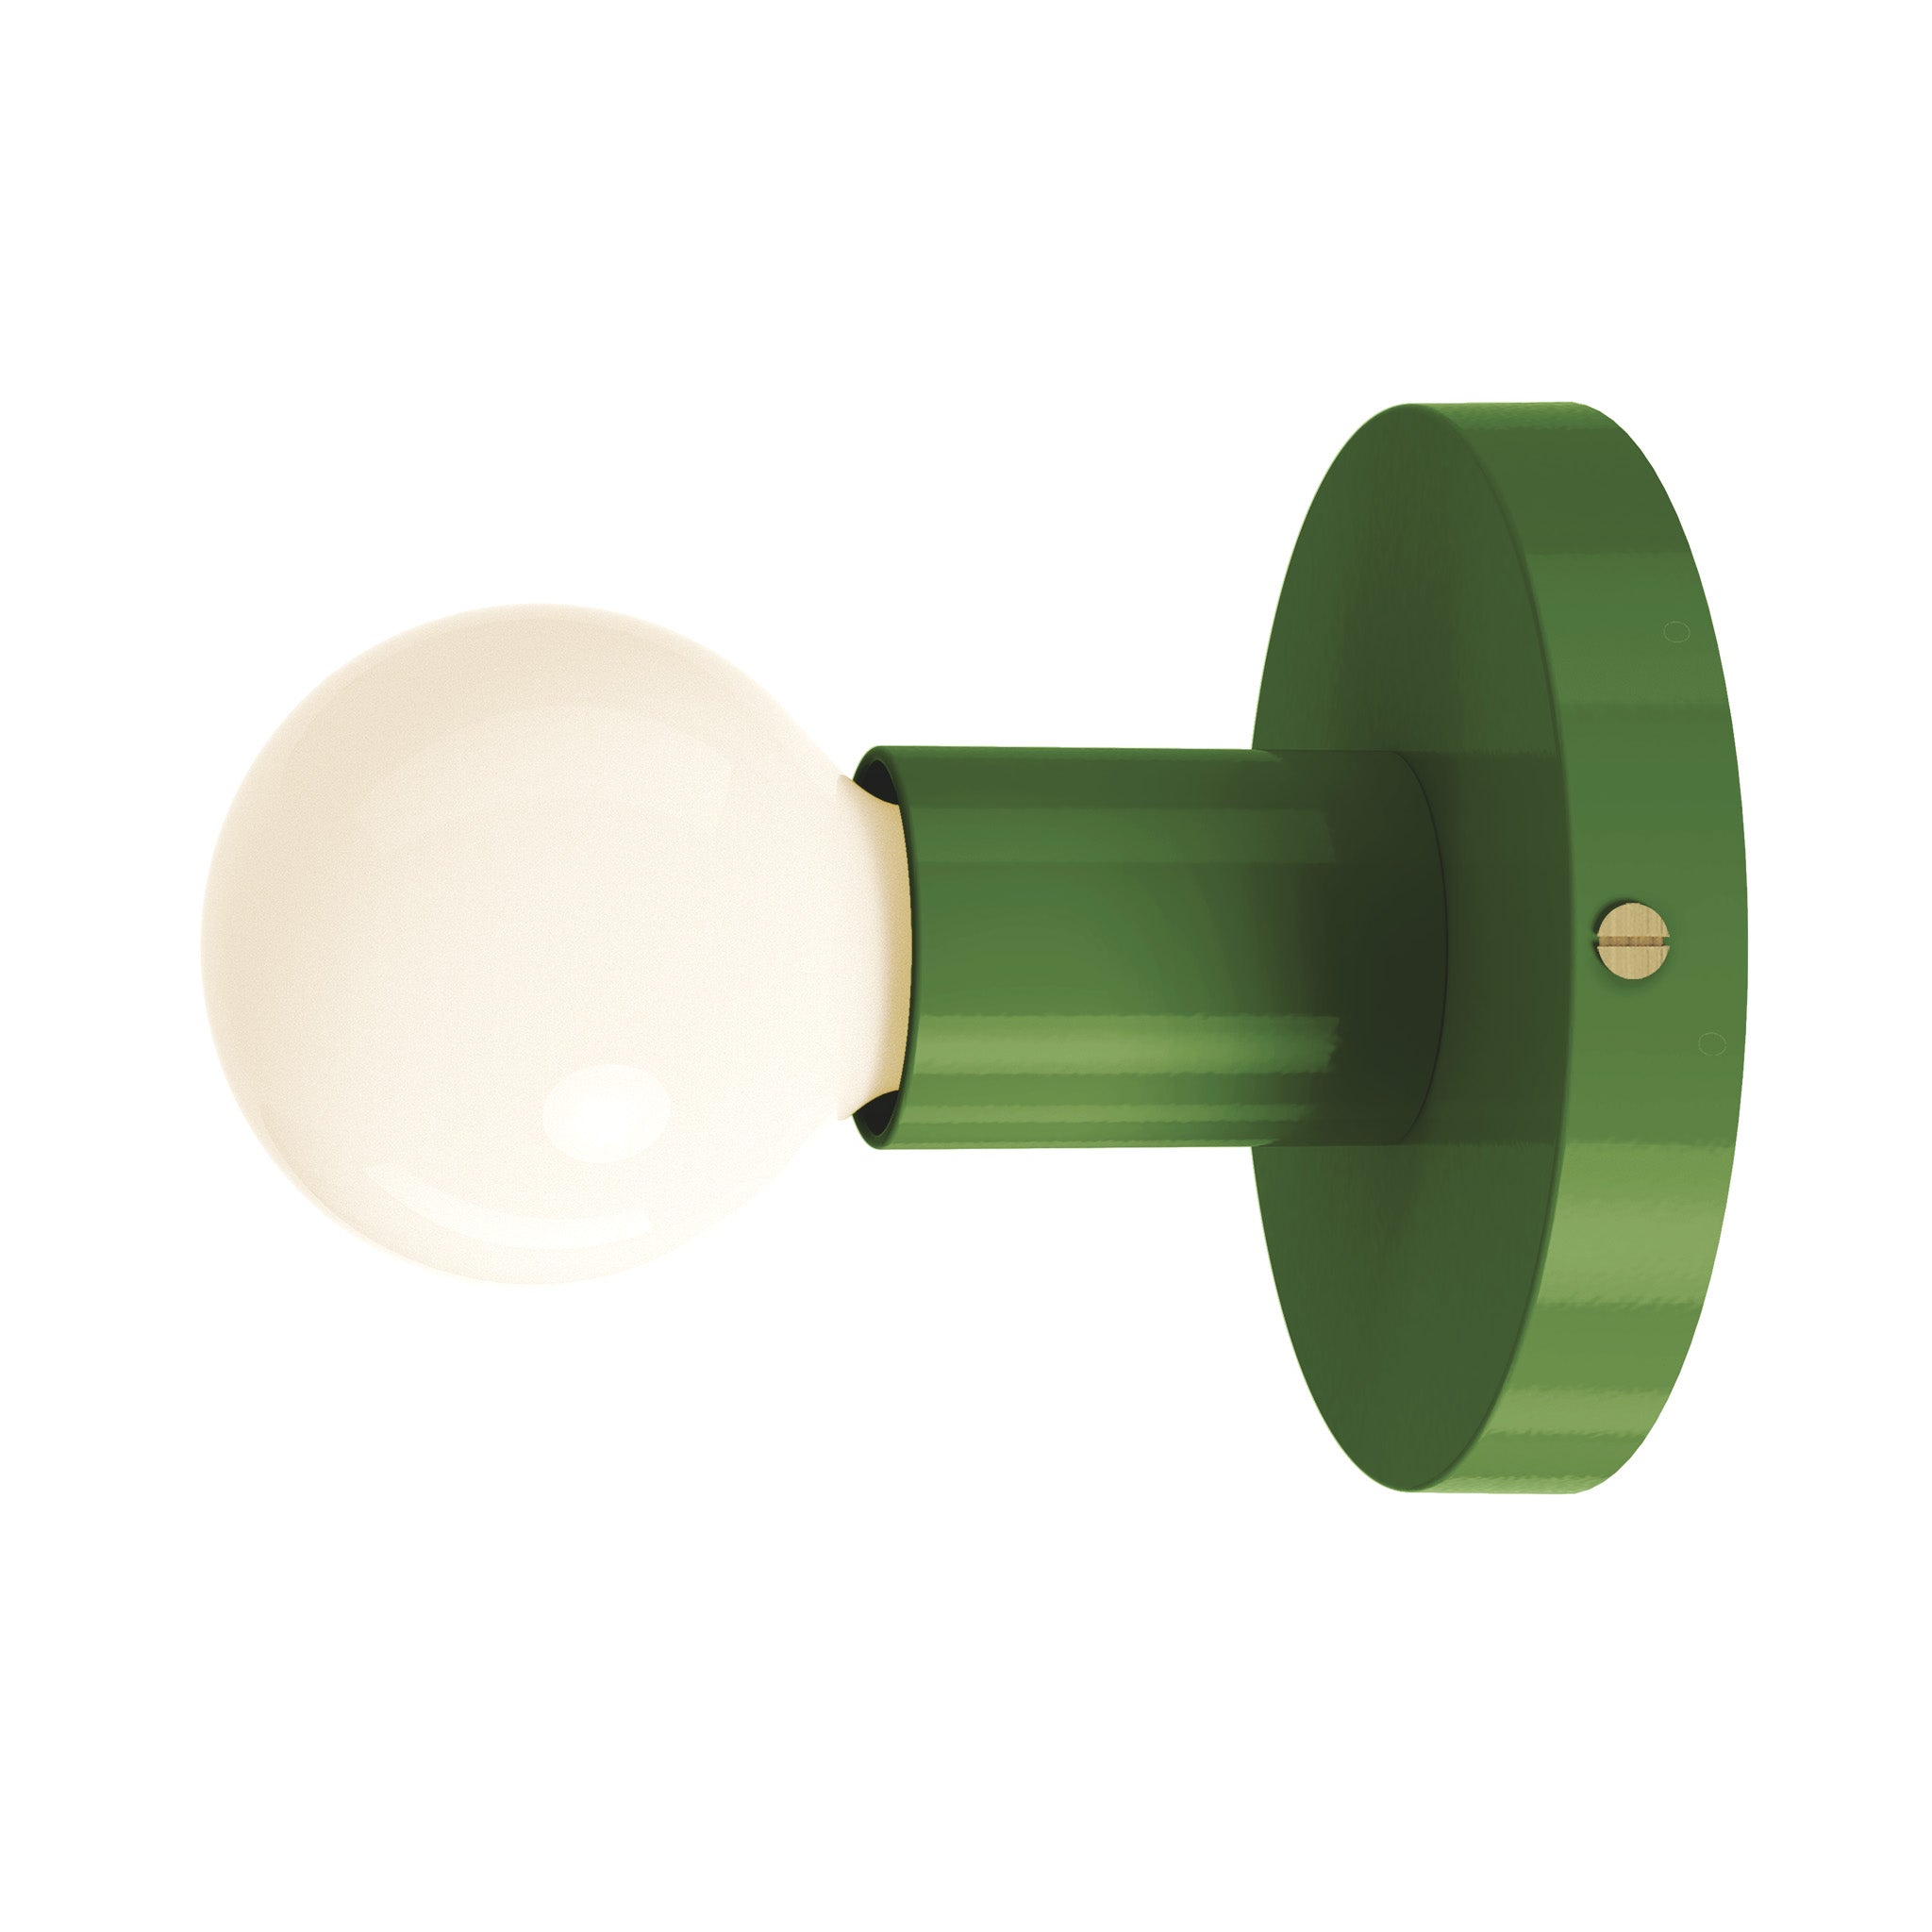 brass python green color twink sconce dutton brown lighting